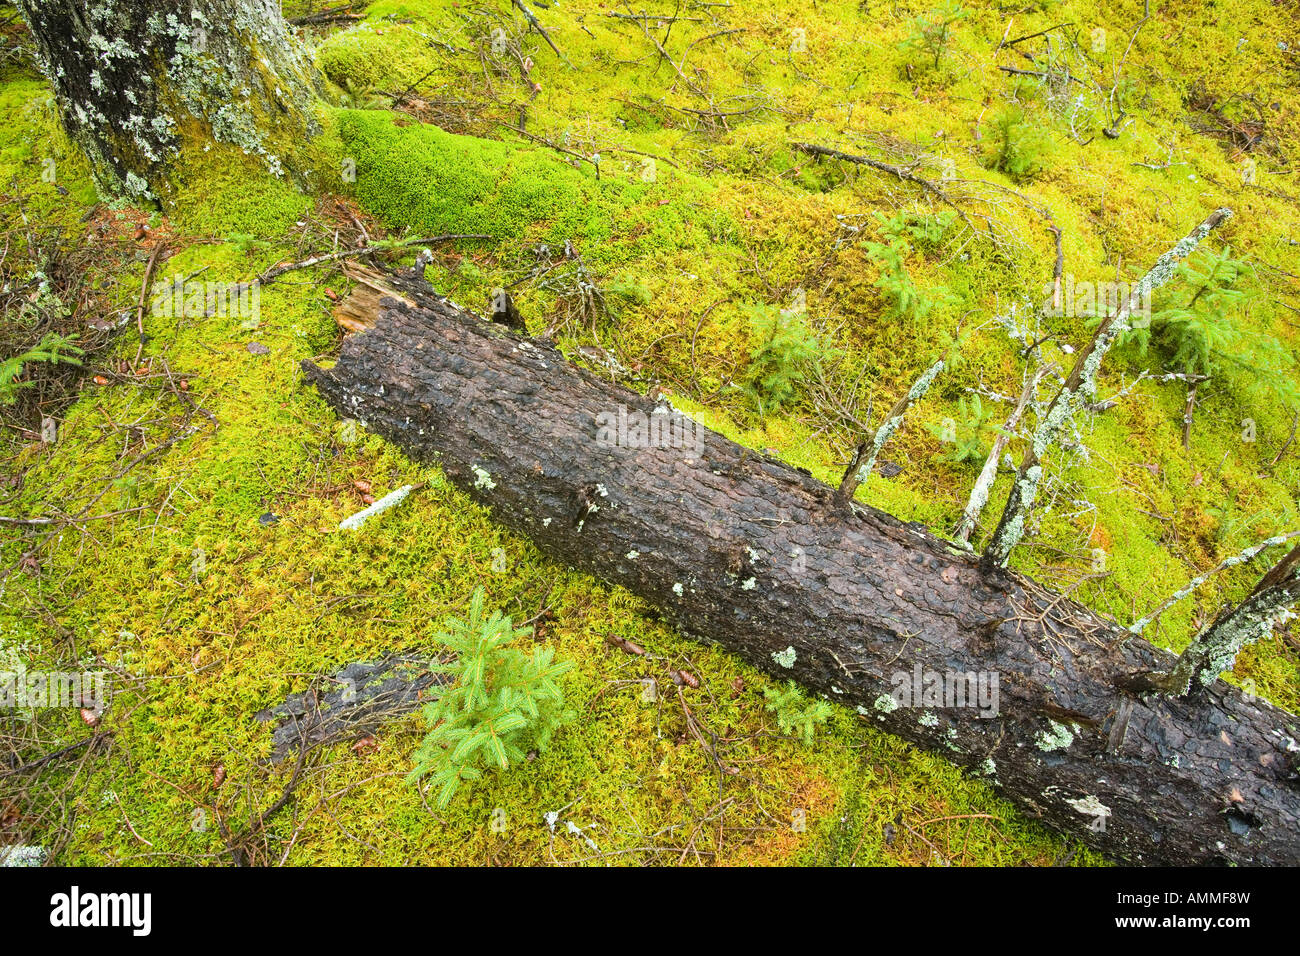 Fallen logs decay into the mossy forest floor in this old spruce forest on Isle Au Haut in Maine s Acadia National Park Duck Har Stock Photo